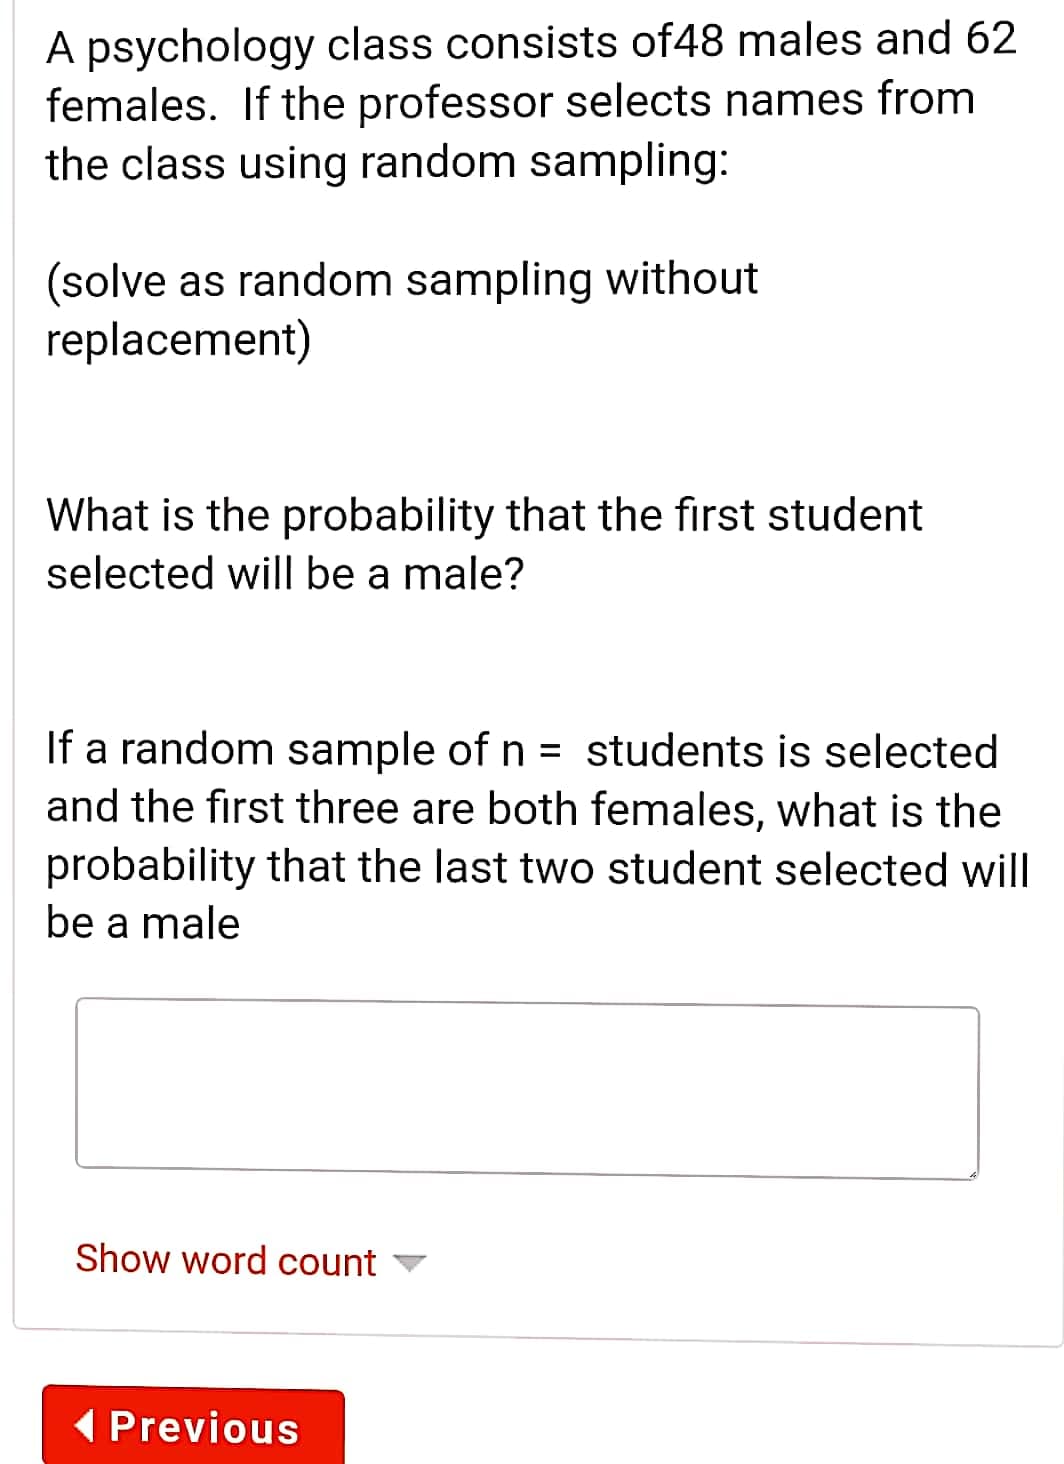 A psychology class consists of48 males and 62
females. If the professor selects names from
the class using random sampling:
(solve as random sampling without
replacement)
What is the probability that the first student
selected will be a male?
If a random sample of n = students is selected
and the first three are both females, what is the
probability that the last two student selected will
be a male
Show word count
(Previous
